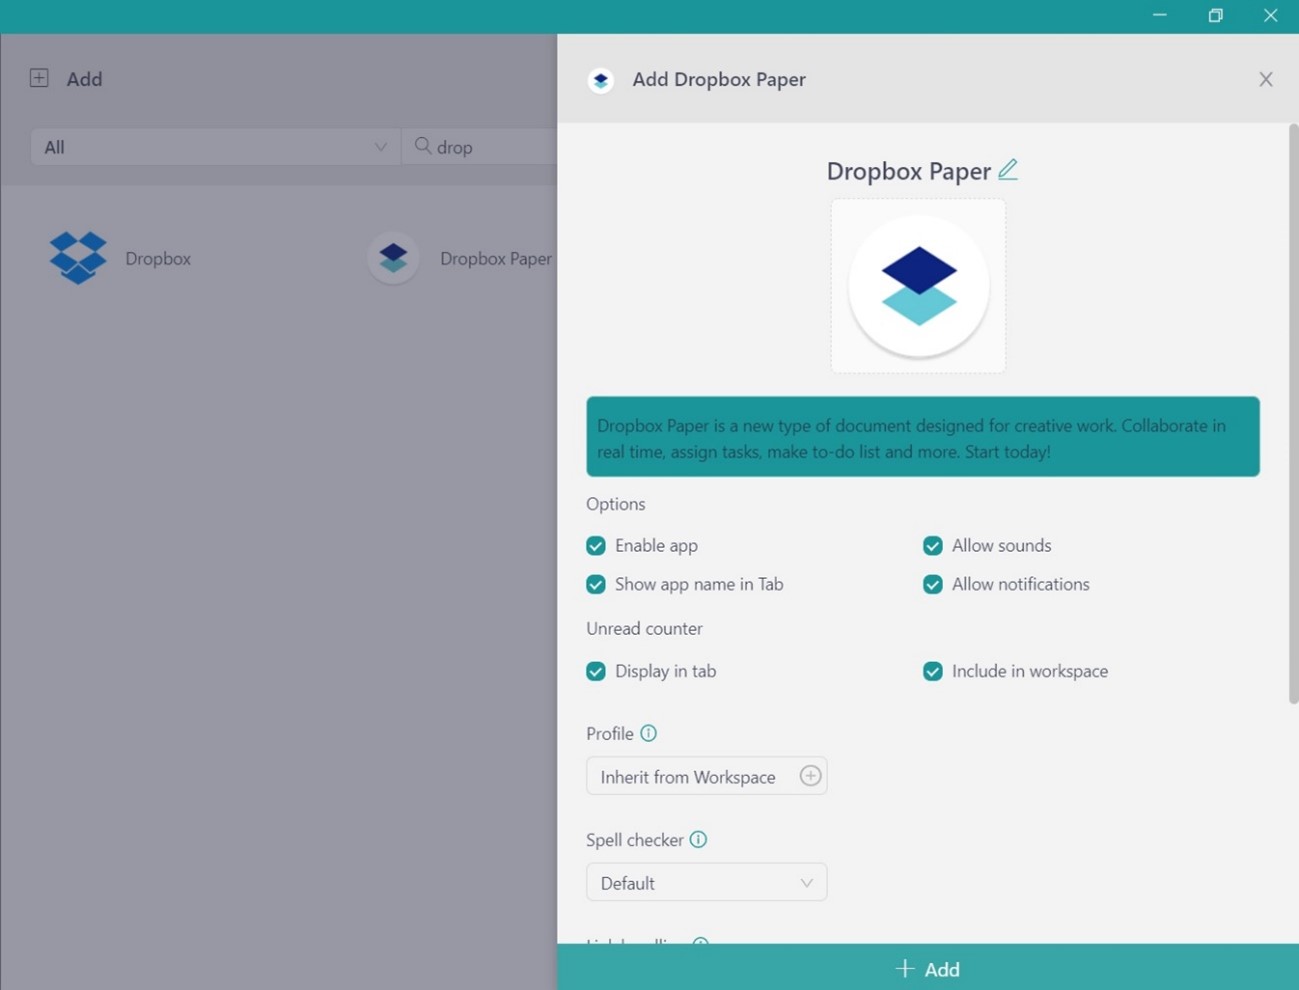 What is Dropbox Paper?